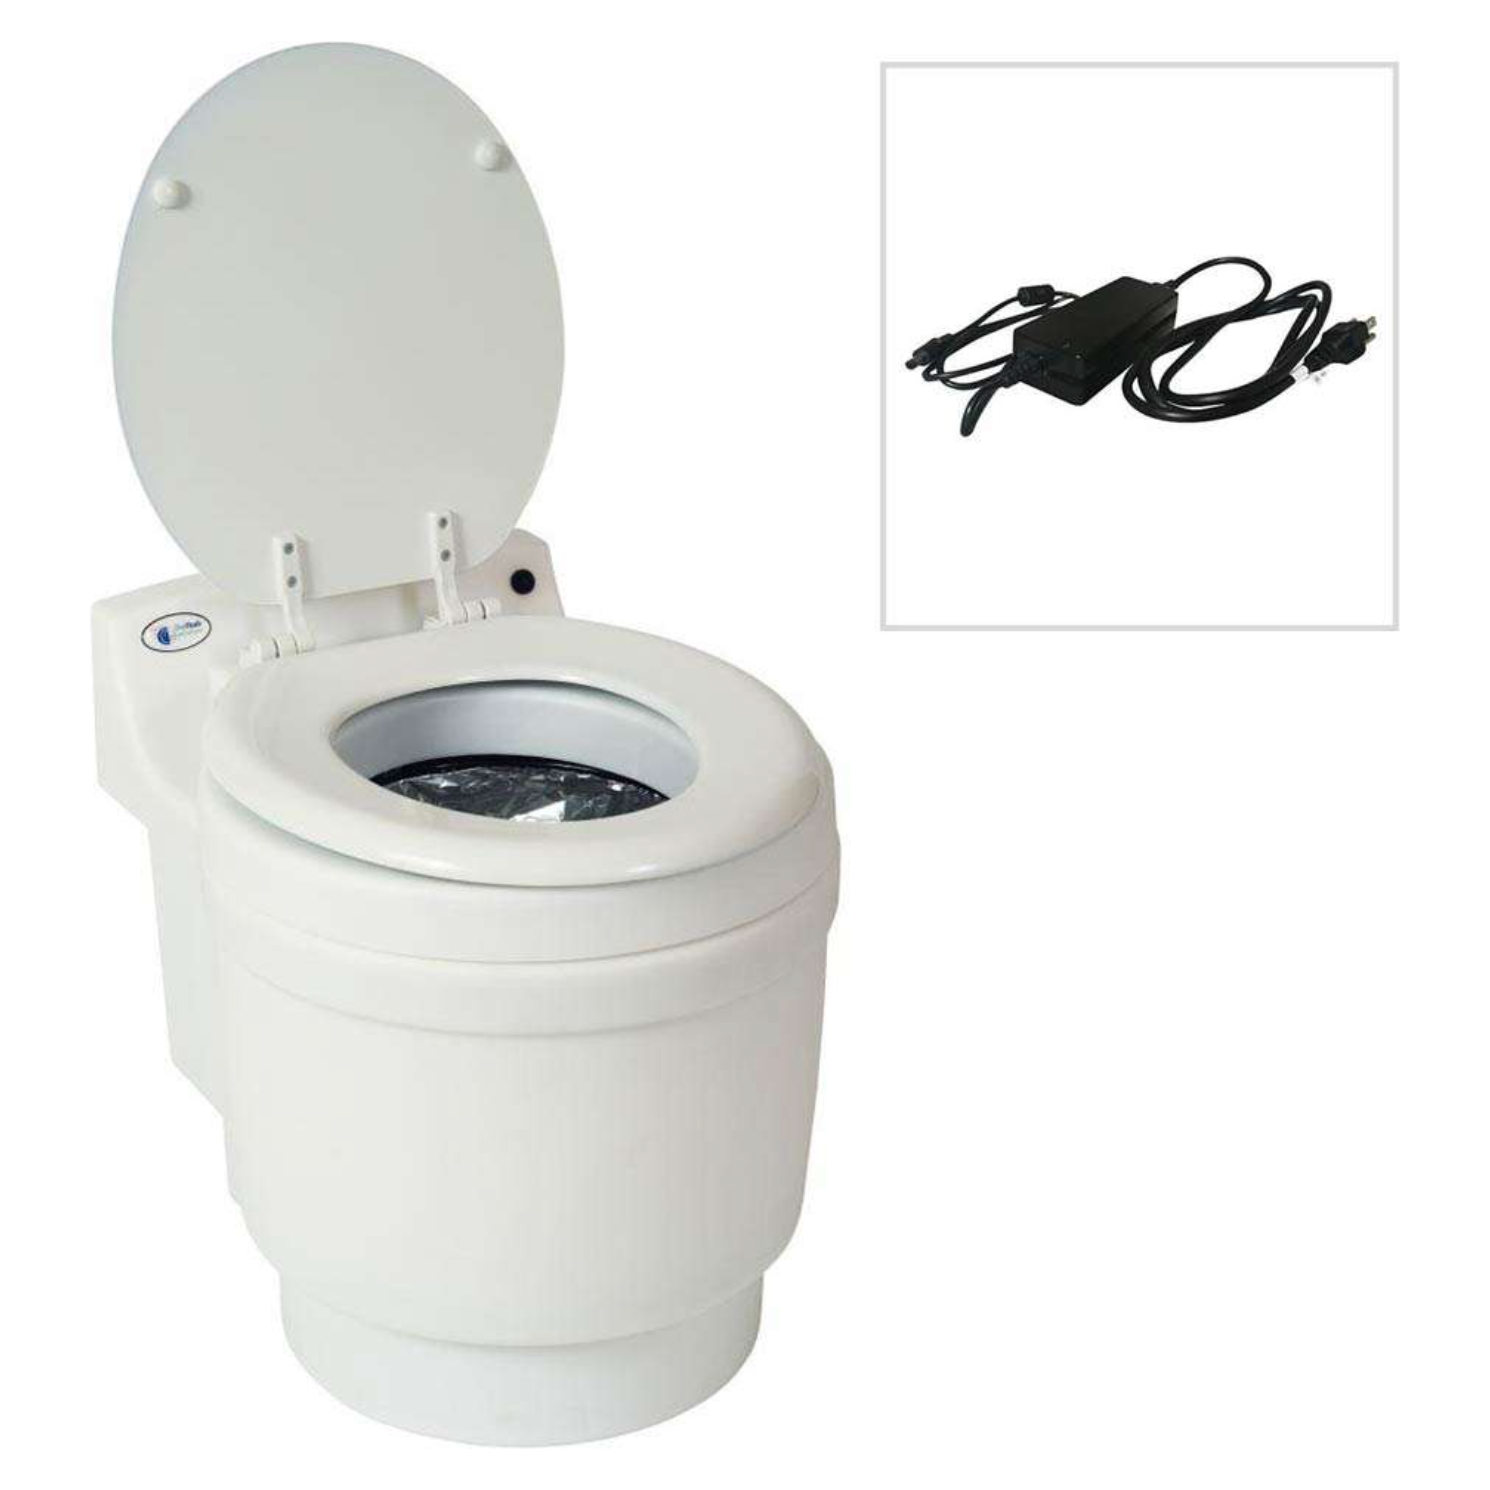 Laveo Dry Flush Portable Electric Waterless Toilet with Wall Outlet 110V DF1045AC